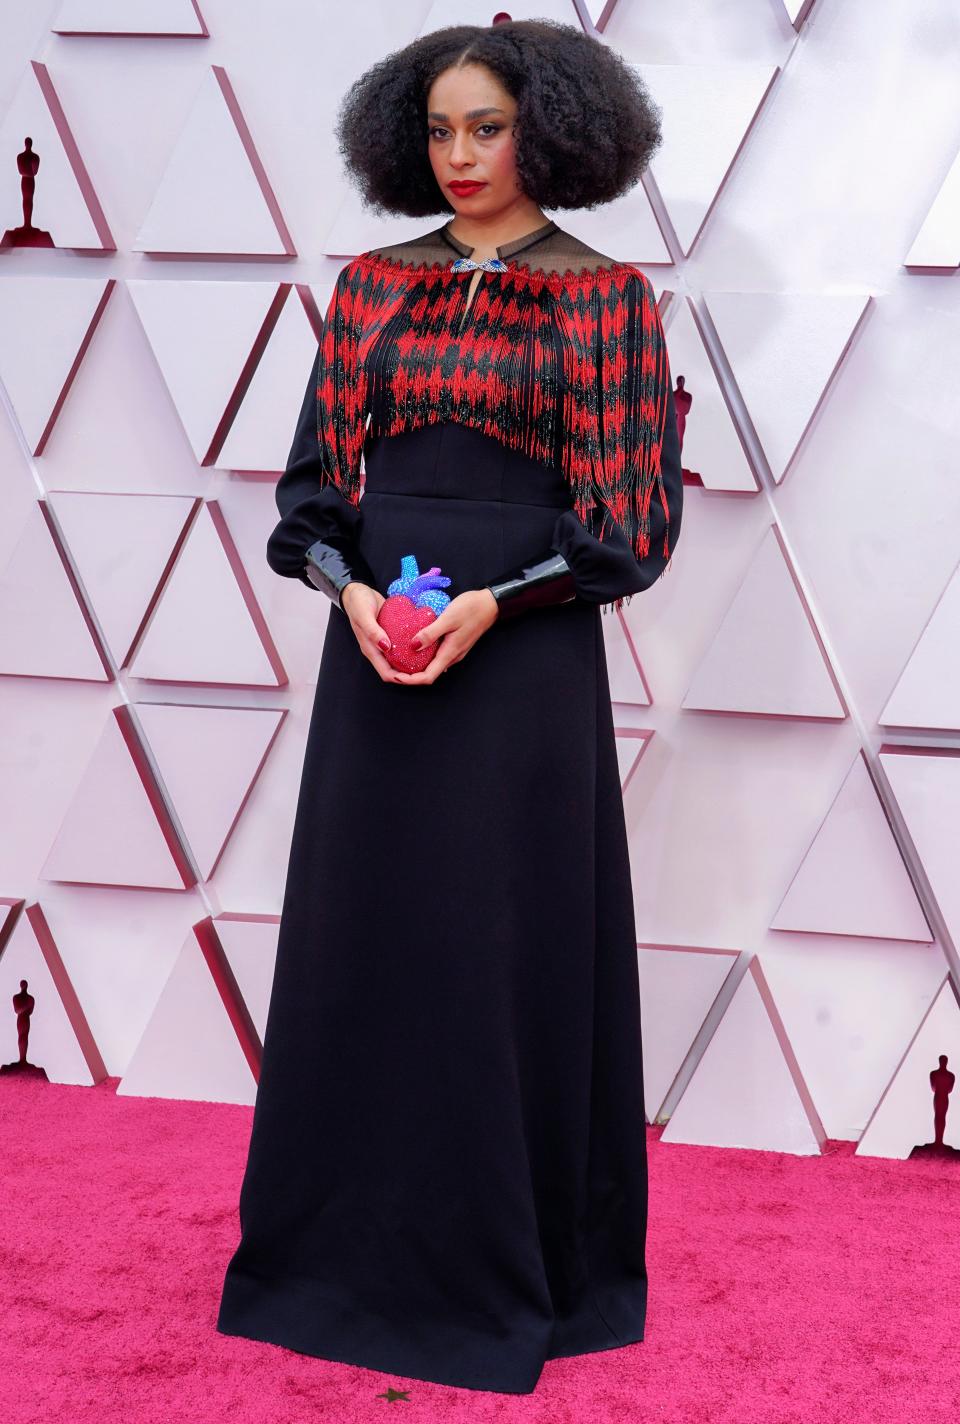 Celeste Waite attends the 2021 Oscars in GucciGetty